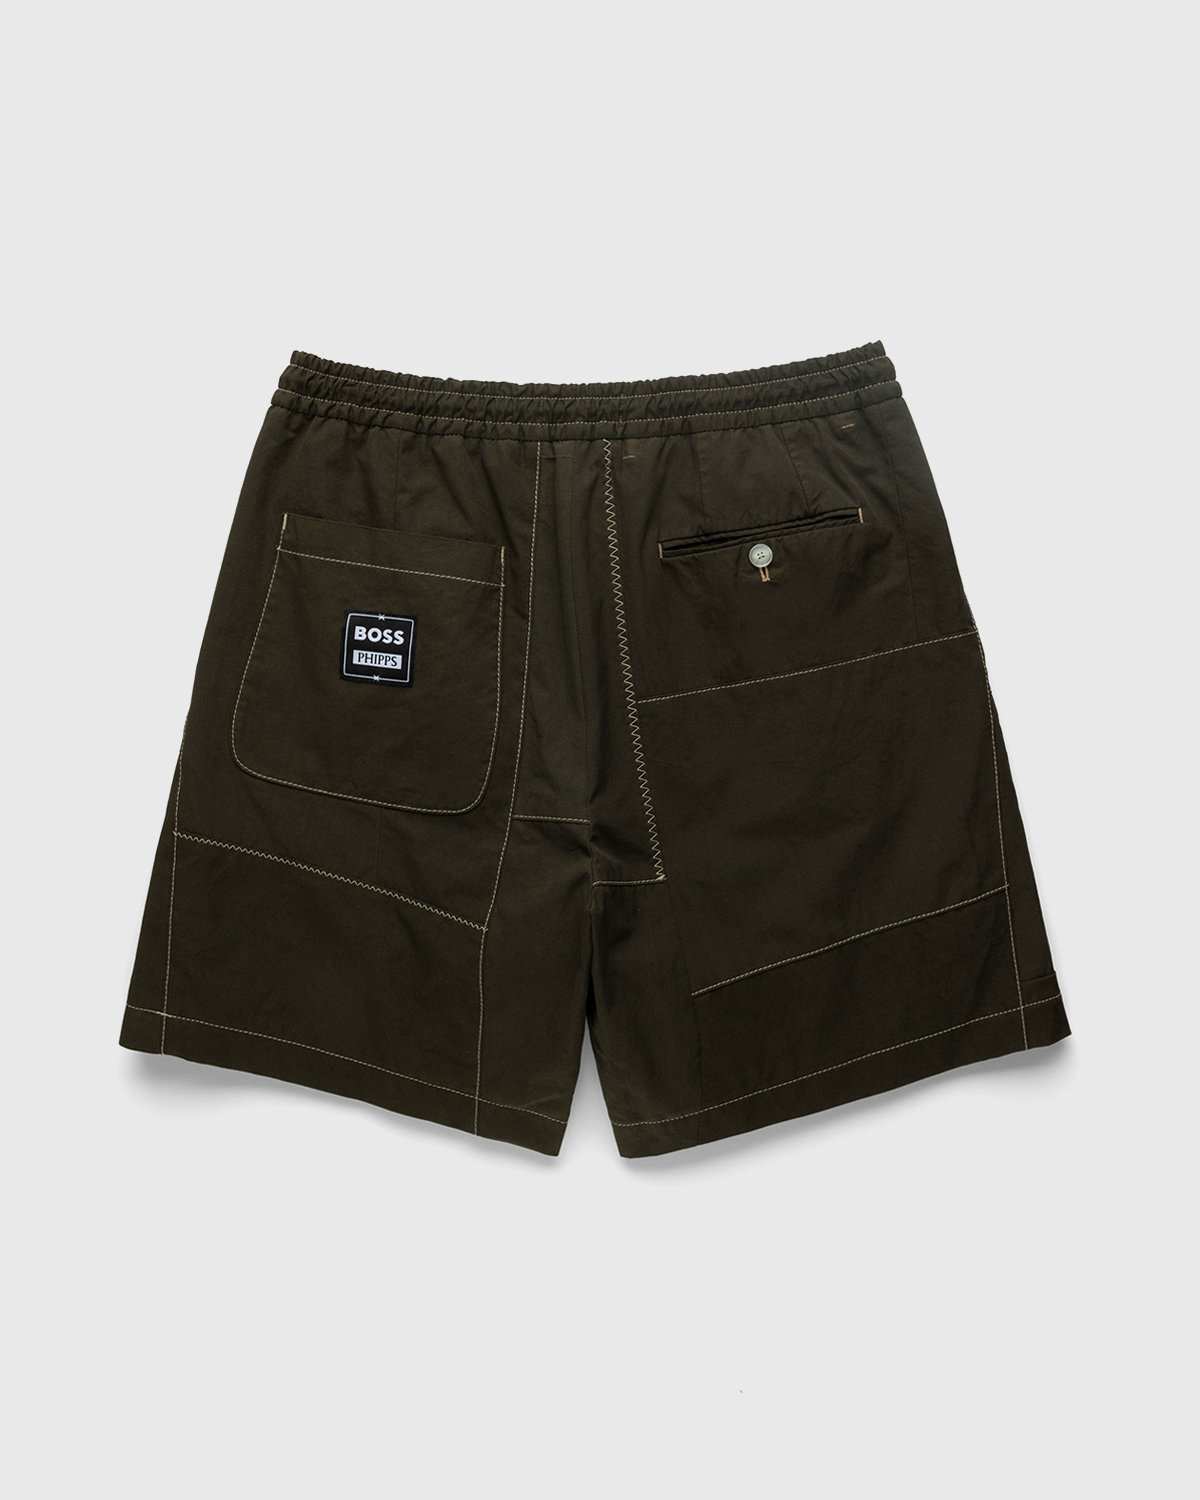 BOSS x Phipps - Cotton Shorts With Buttoned Hem Dark Green - Clothing - Green - Image 2